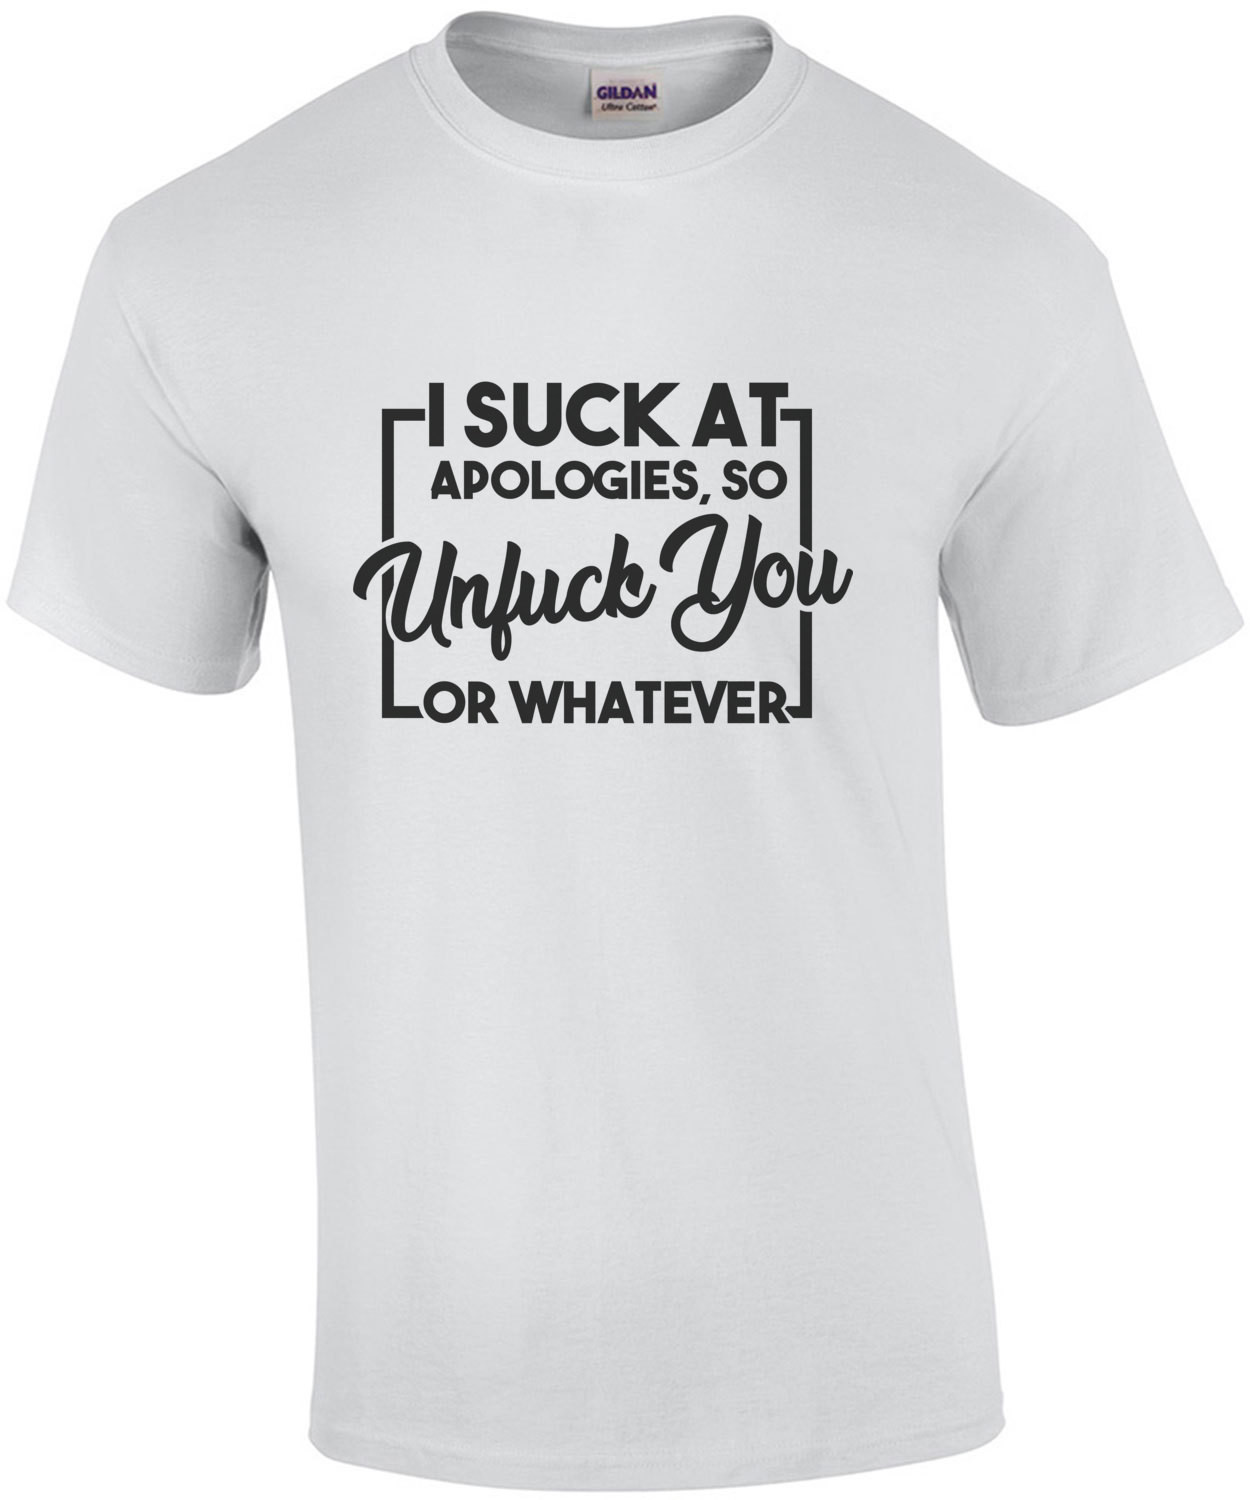 I suck at apologies, so unfuck you or whatever - funny t-shirt